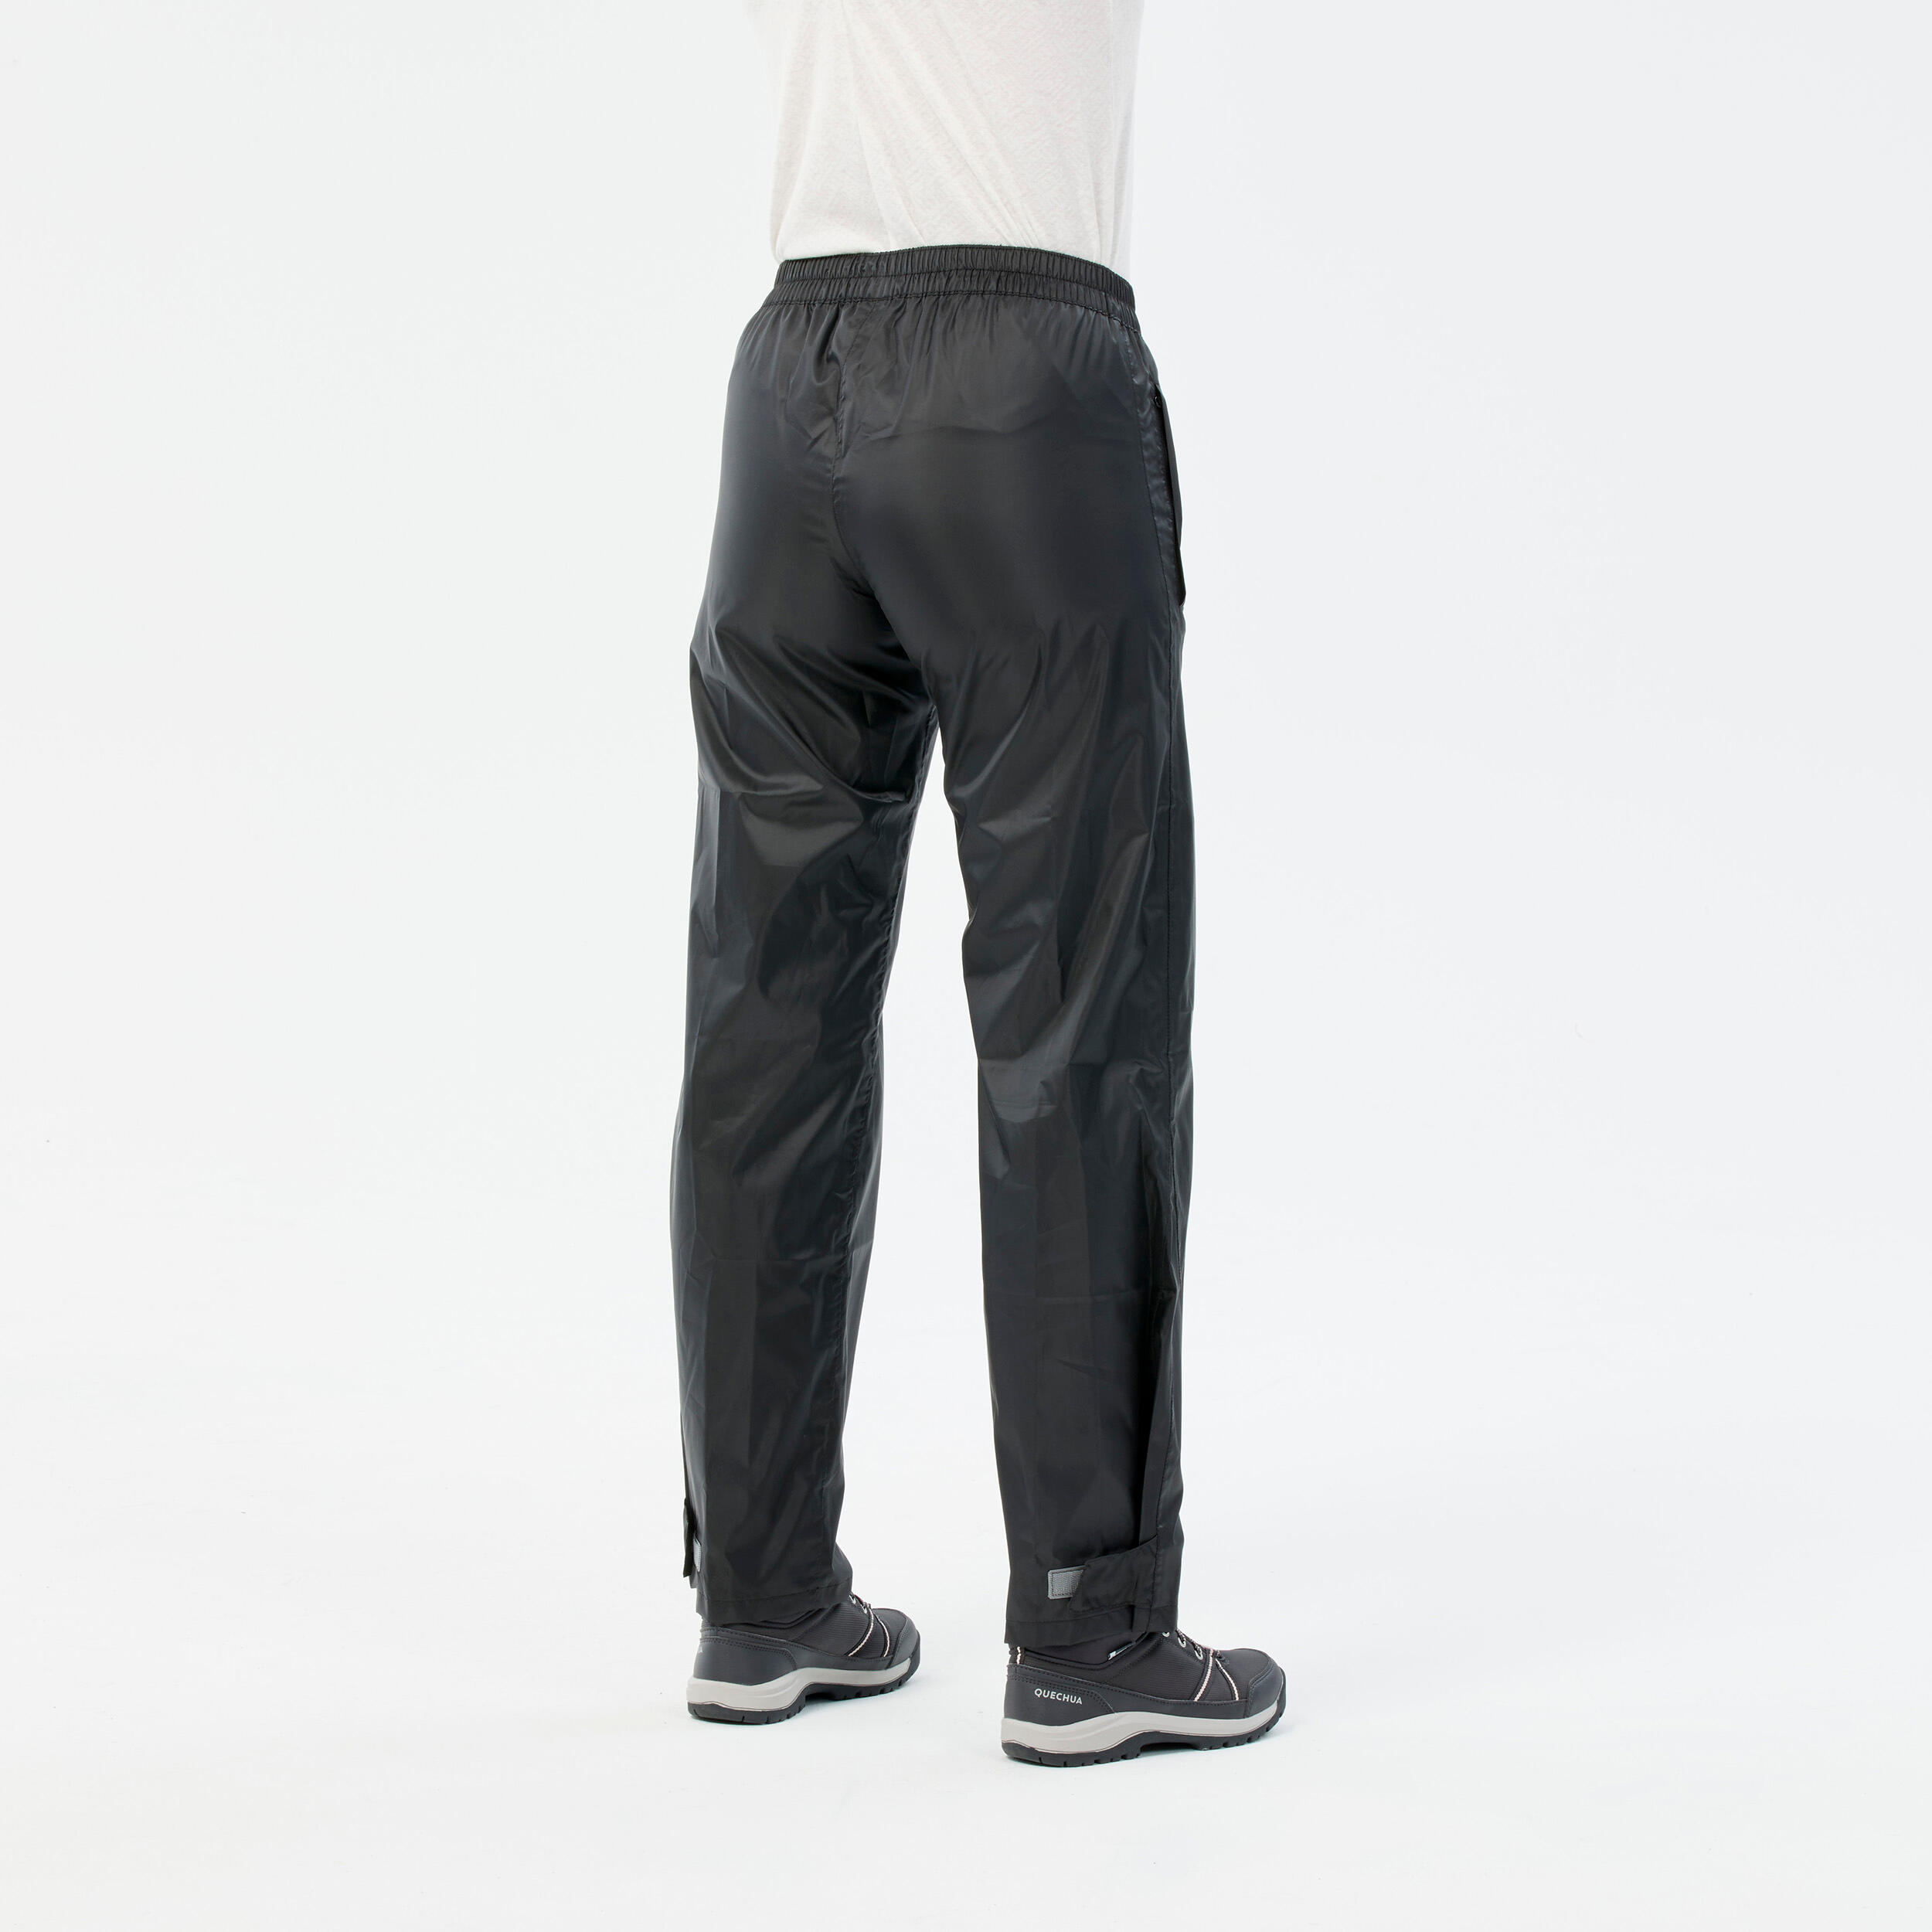 Jeans & Trousers, Price Drop🚨Brand New Decathlon black pant with pockets.